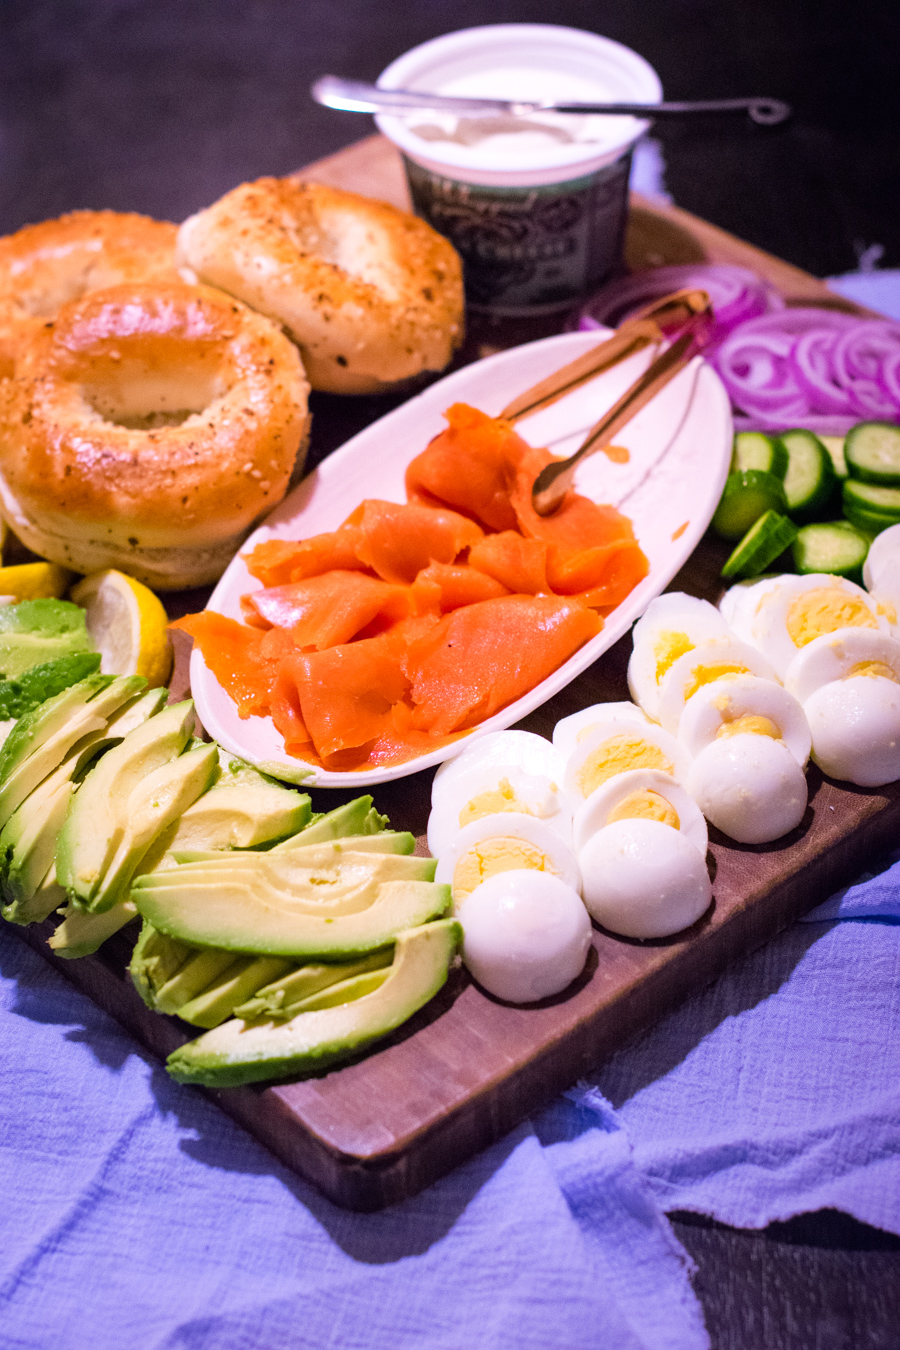 Everything Bagels, lox, and assorted accompaniments on a platter